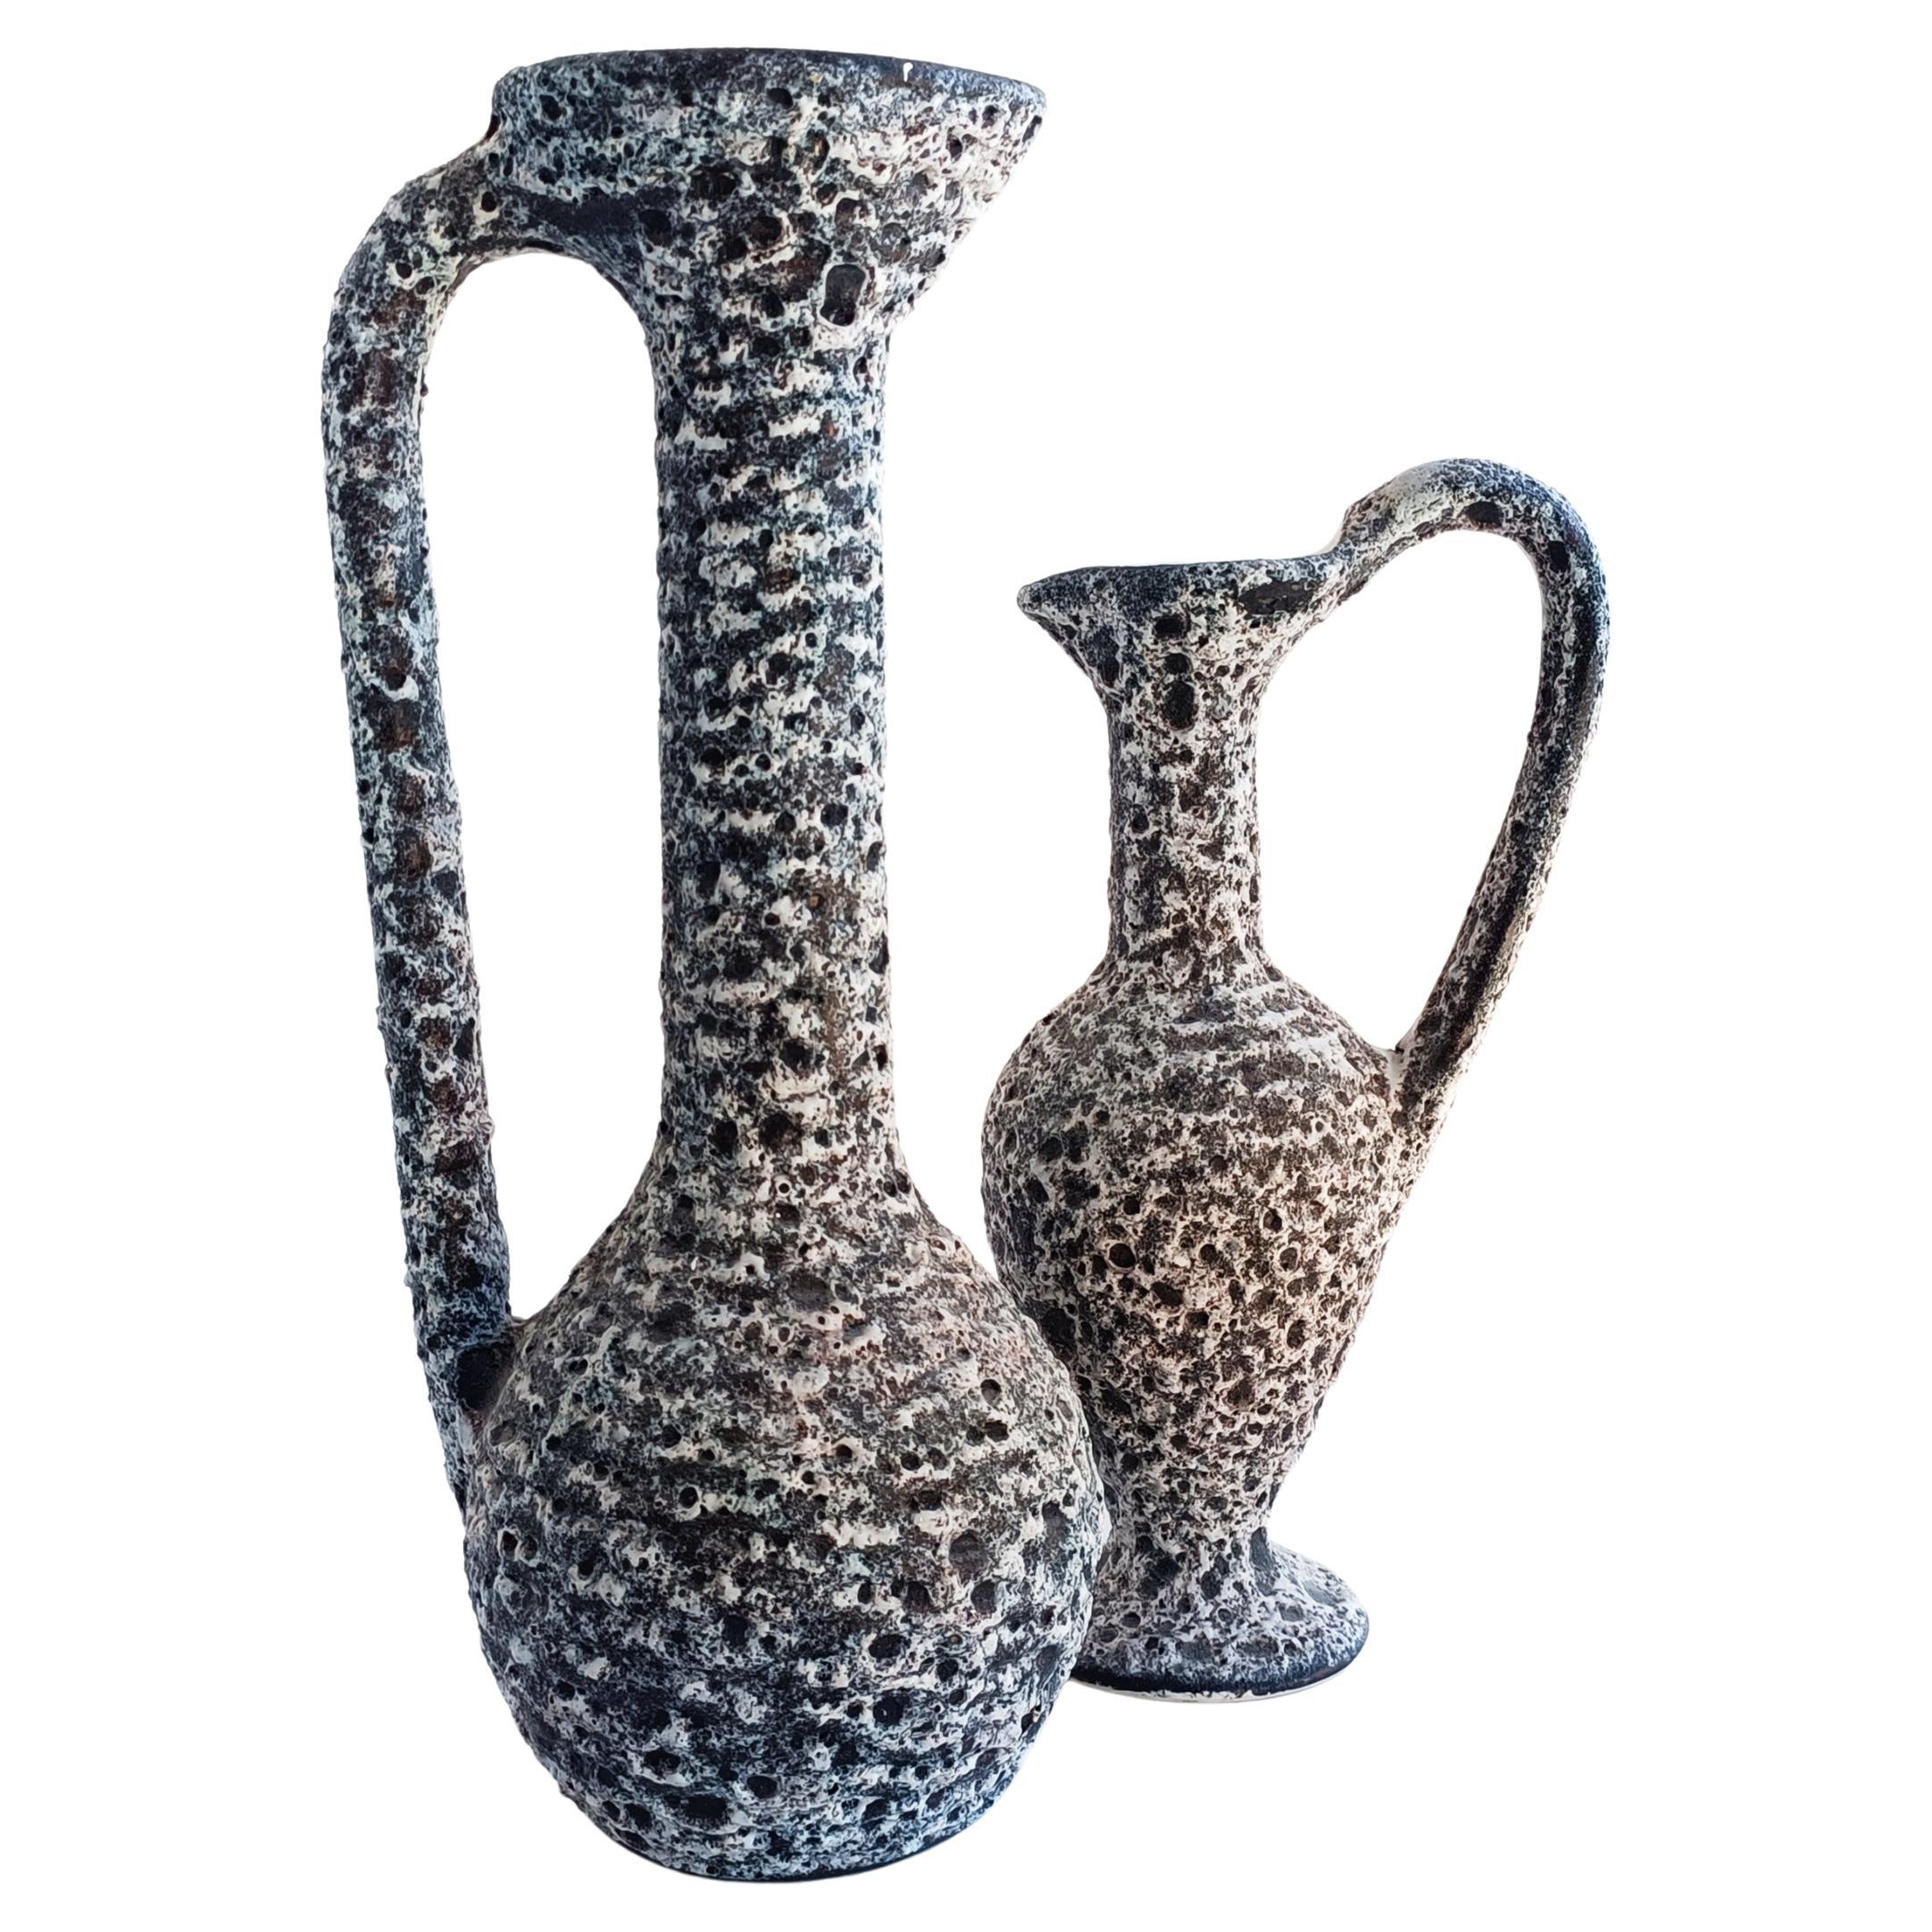 Stunning pair of large Brutalist Fat Lava decor fire burned glazing ceramic pitchers created by artist Alain Rufas and hand-produced in Vallauris, South France, circa the 1960s. 

Measurements:
Larger one
H. 40cm/ 16